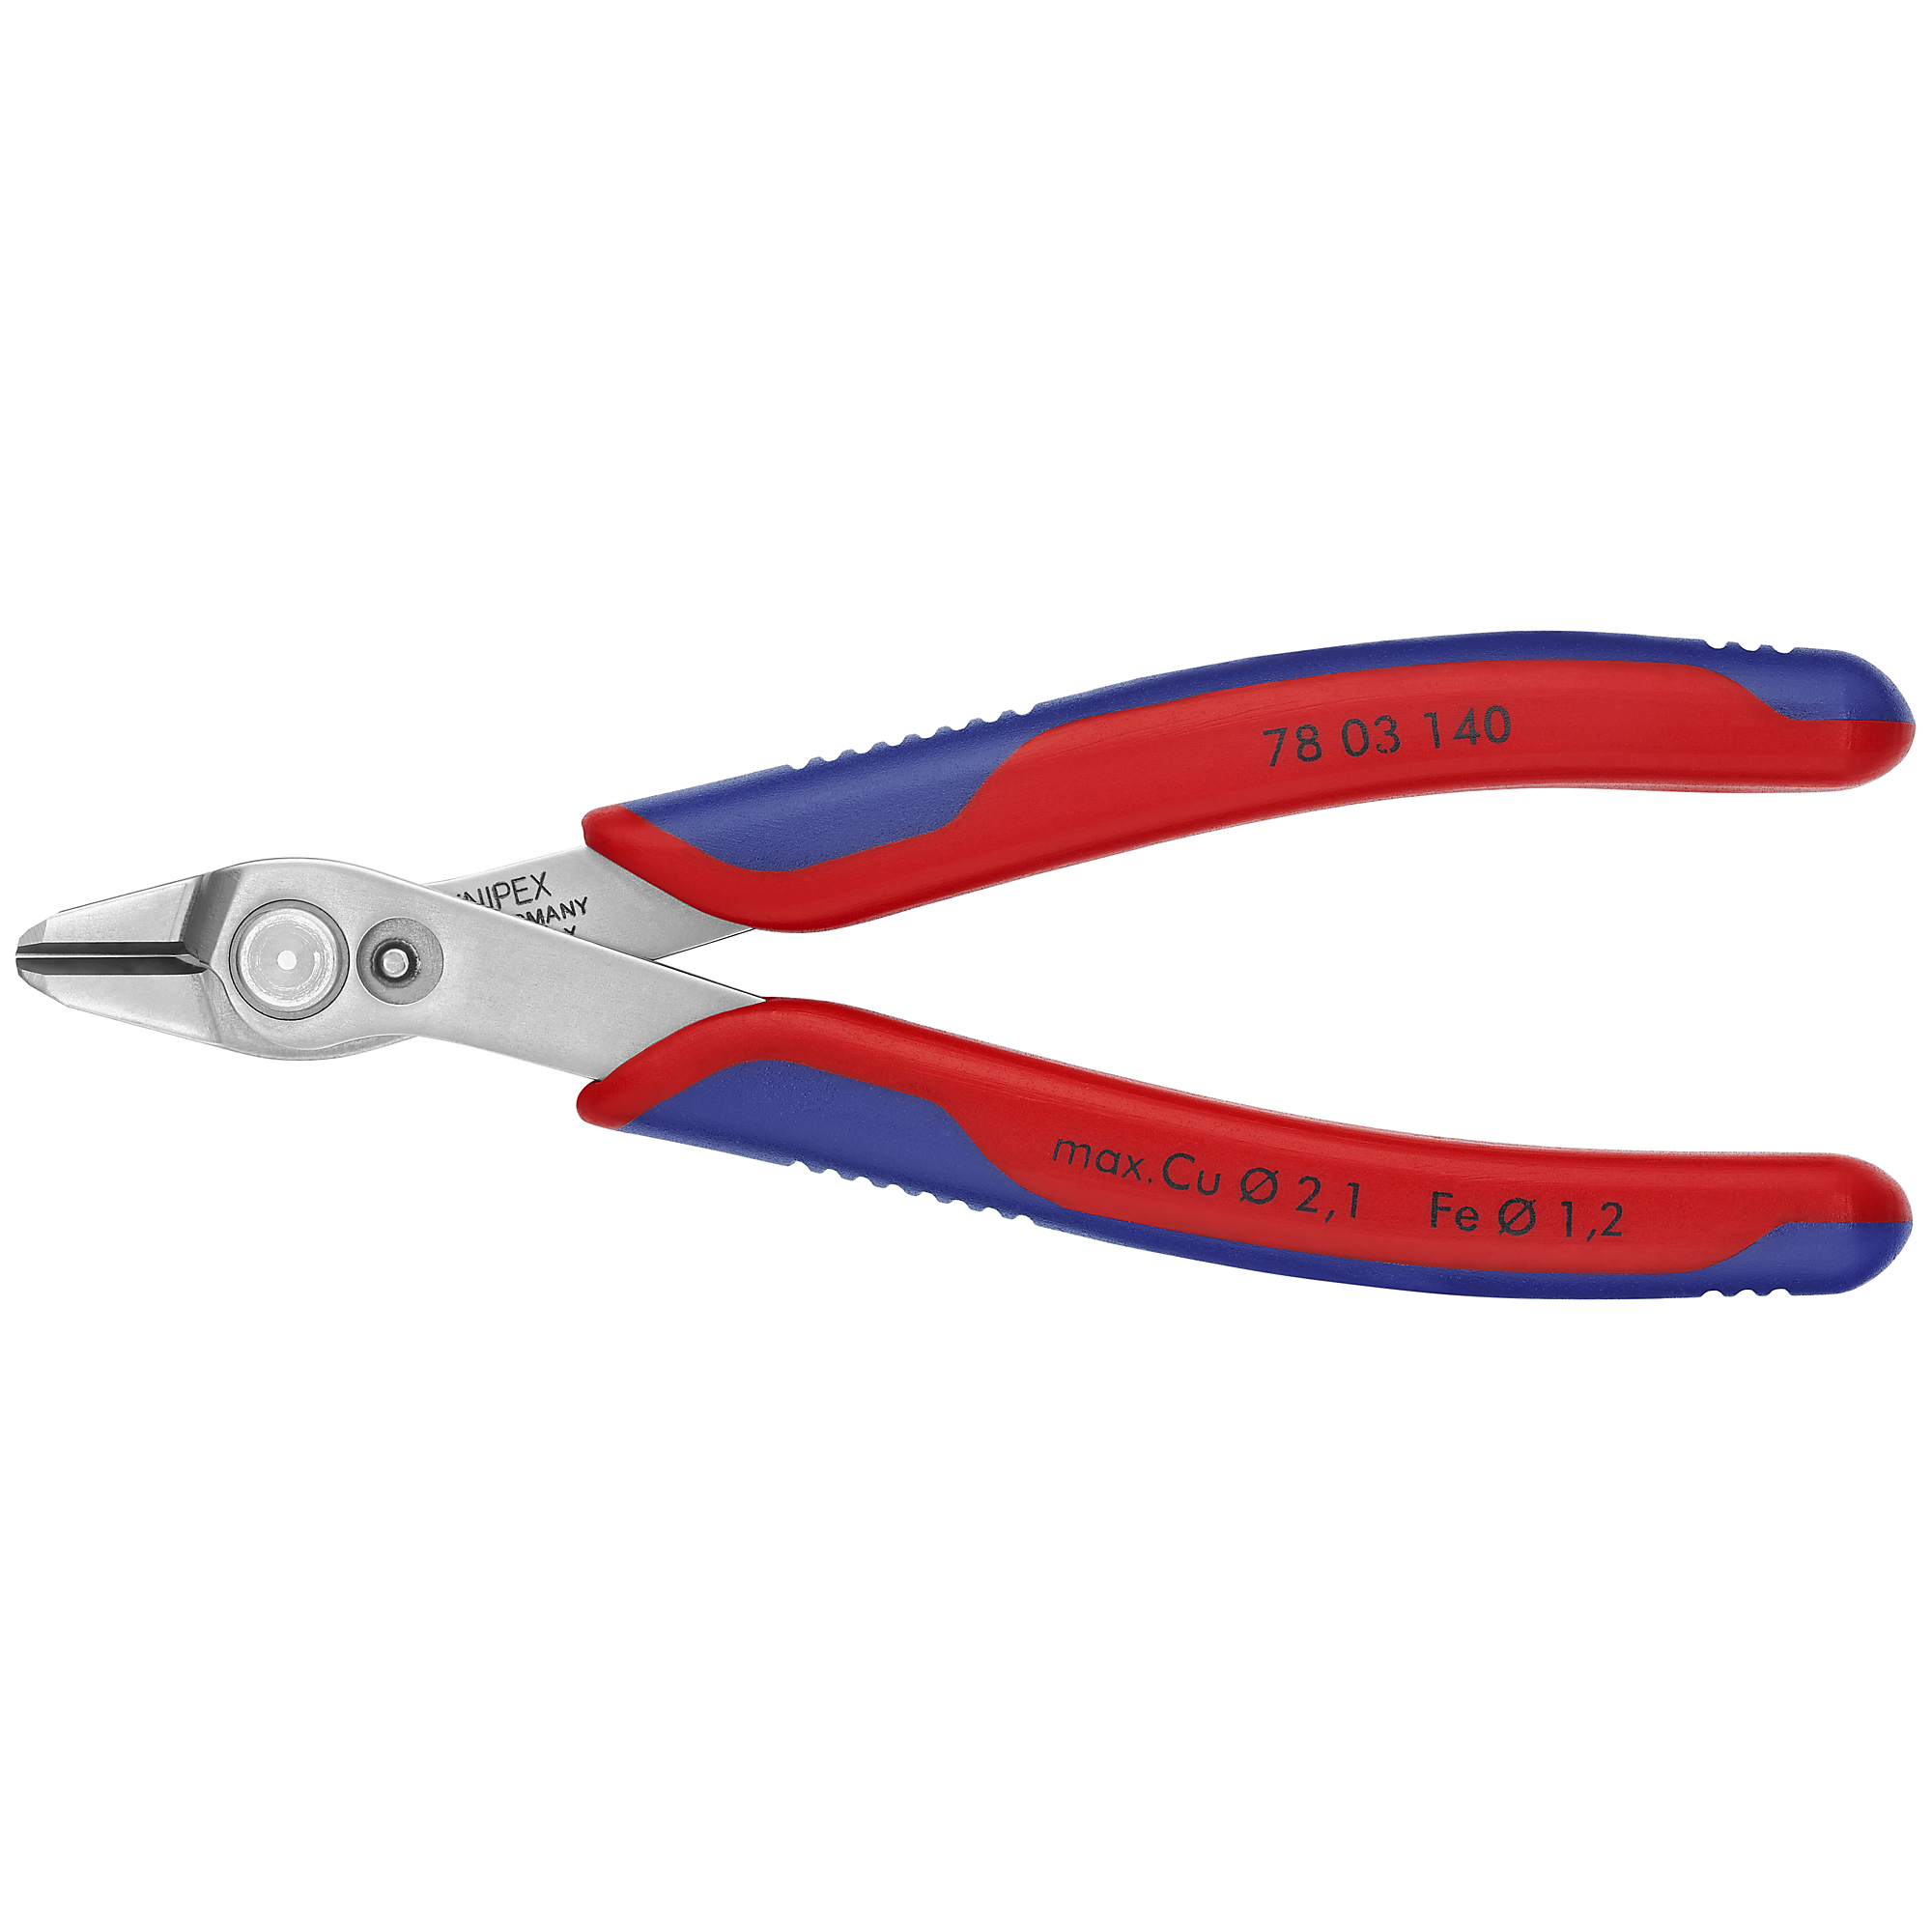 KNIPEX Super Knips , Electronics Super Knips XL, Comfort grip, 5.5Inch, Pieces (qty.) 1 Material Steel, Jaw Capacity 0.125 in, Model 78 03 140 SBA